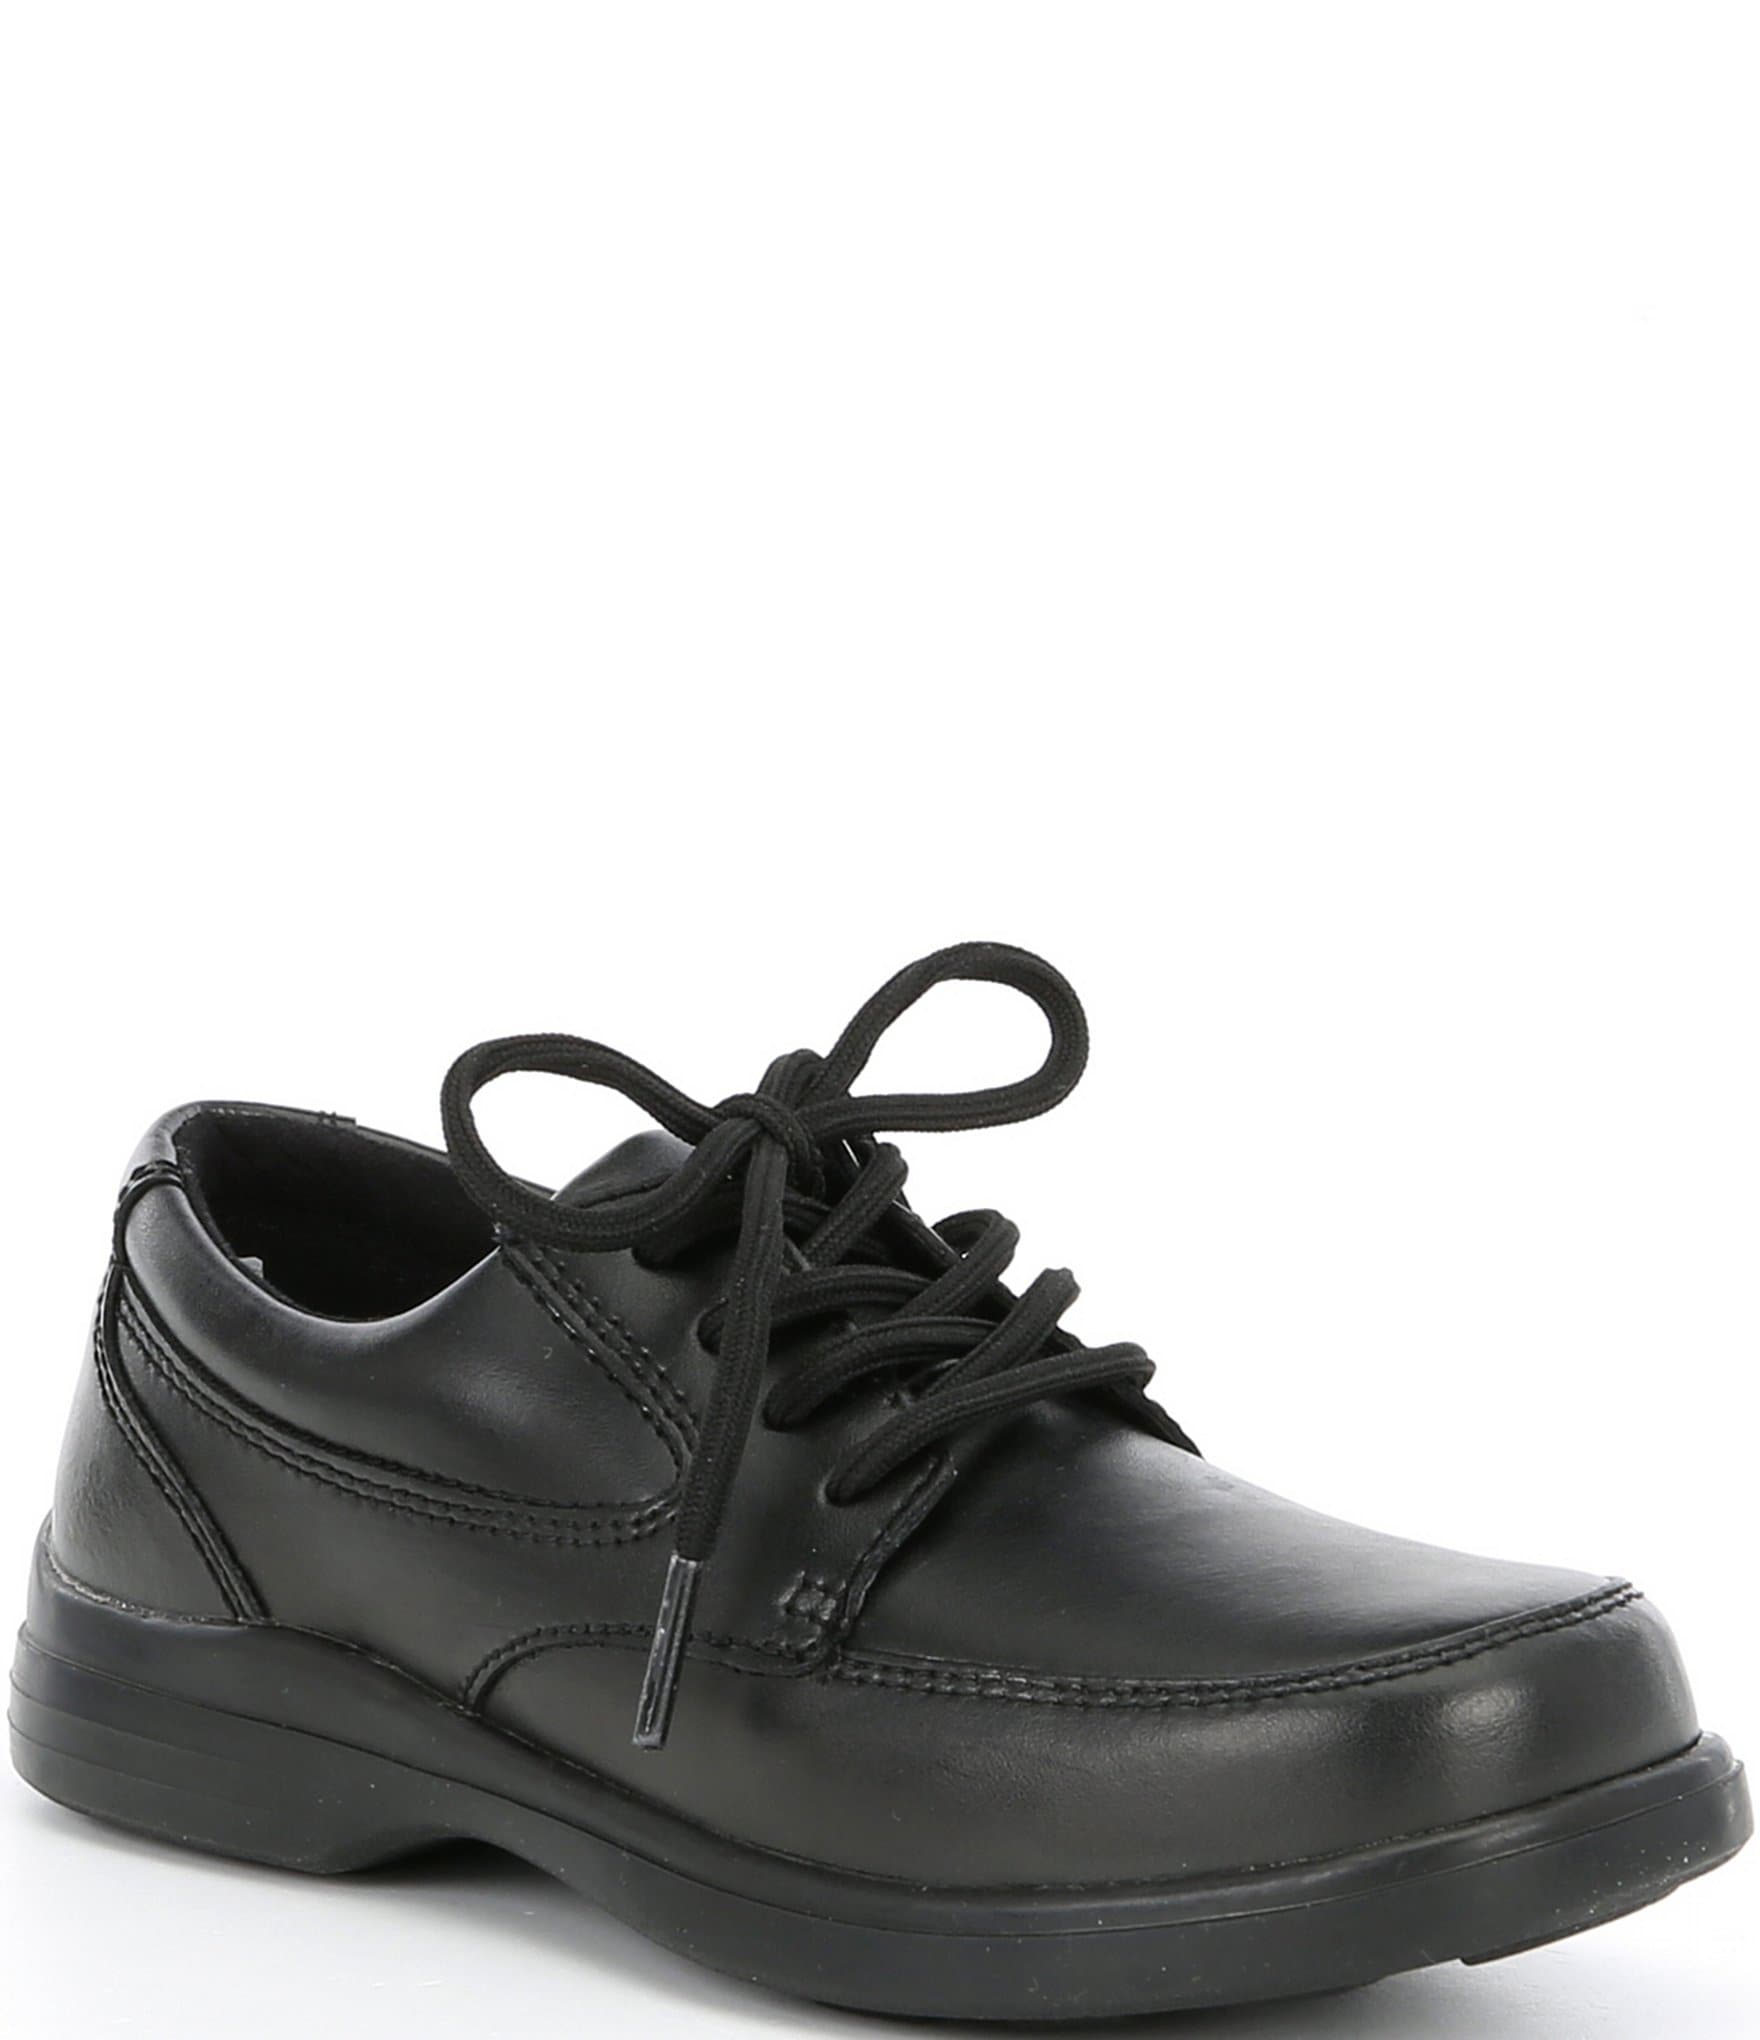 Black Hush Puppies - Mens Hush Puppies Cain Black Leather Lace Up Work ...